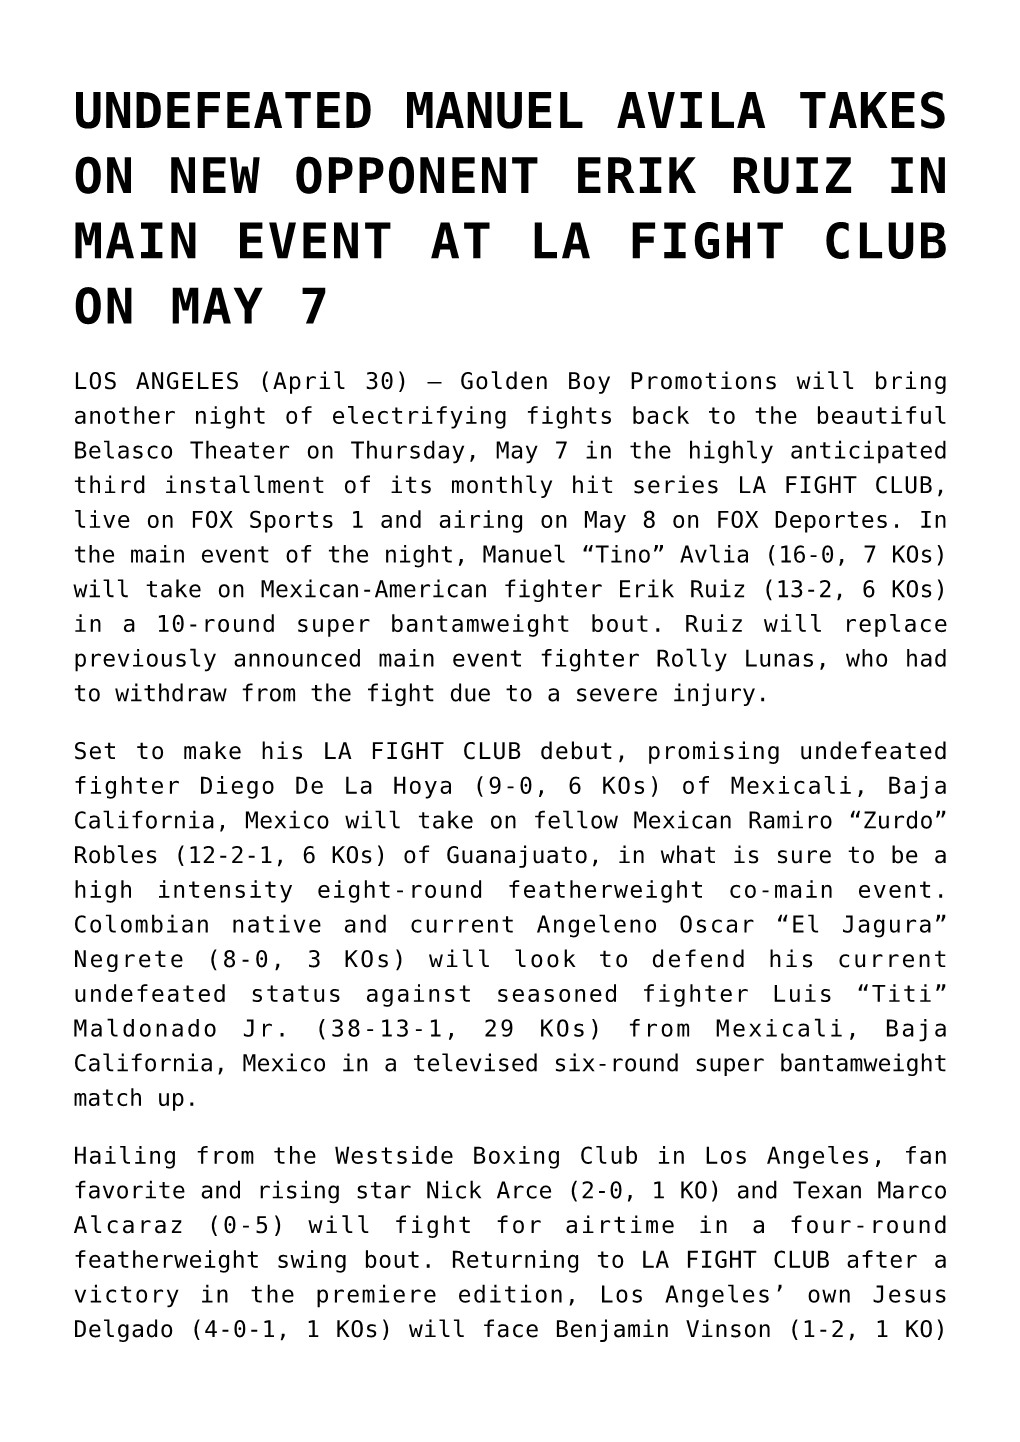 Undefeated Manuel Avila Takes on New Opponent Erik Ruiz in Main Event at La Fight Club on May 7